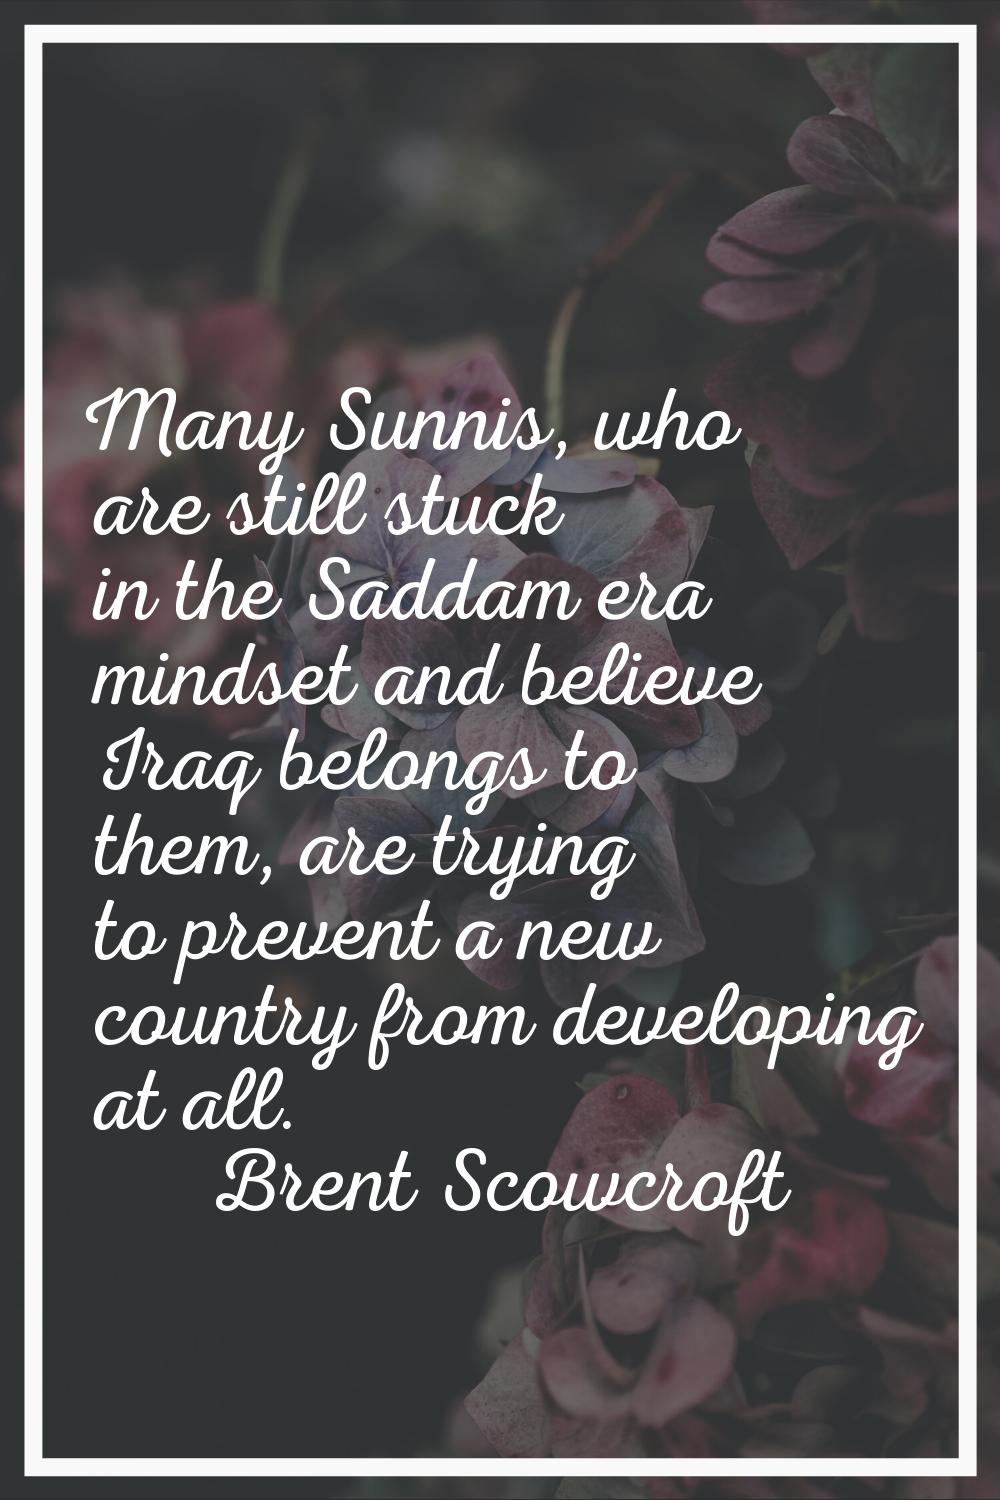 Many Sunnis, who are still stuck in the Saddam era mindset and believe Iraq belongs to them, are tr